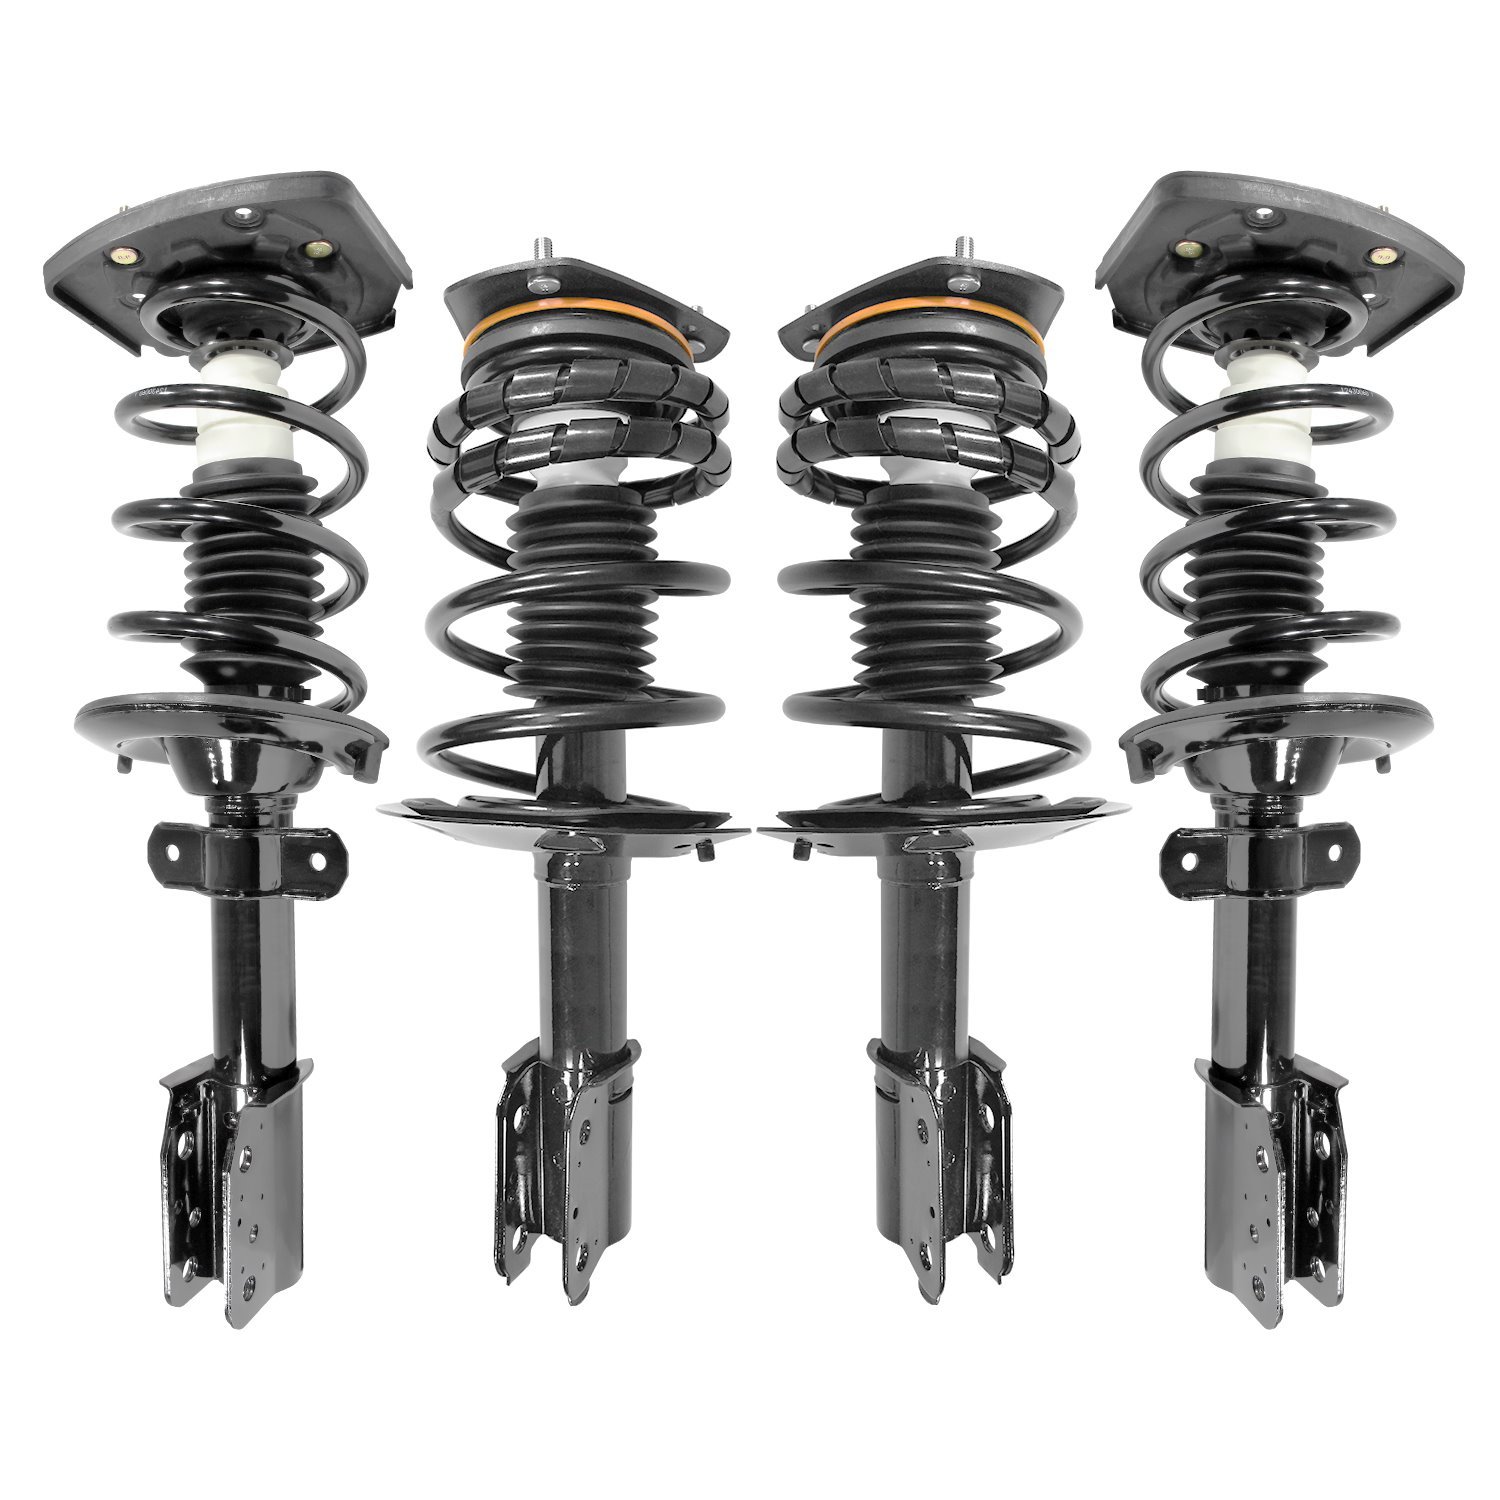 4-11020-15021-001 Front & Rear Suspension Strut & Coil Spring Assembly Kit Fits Select GM